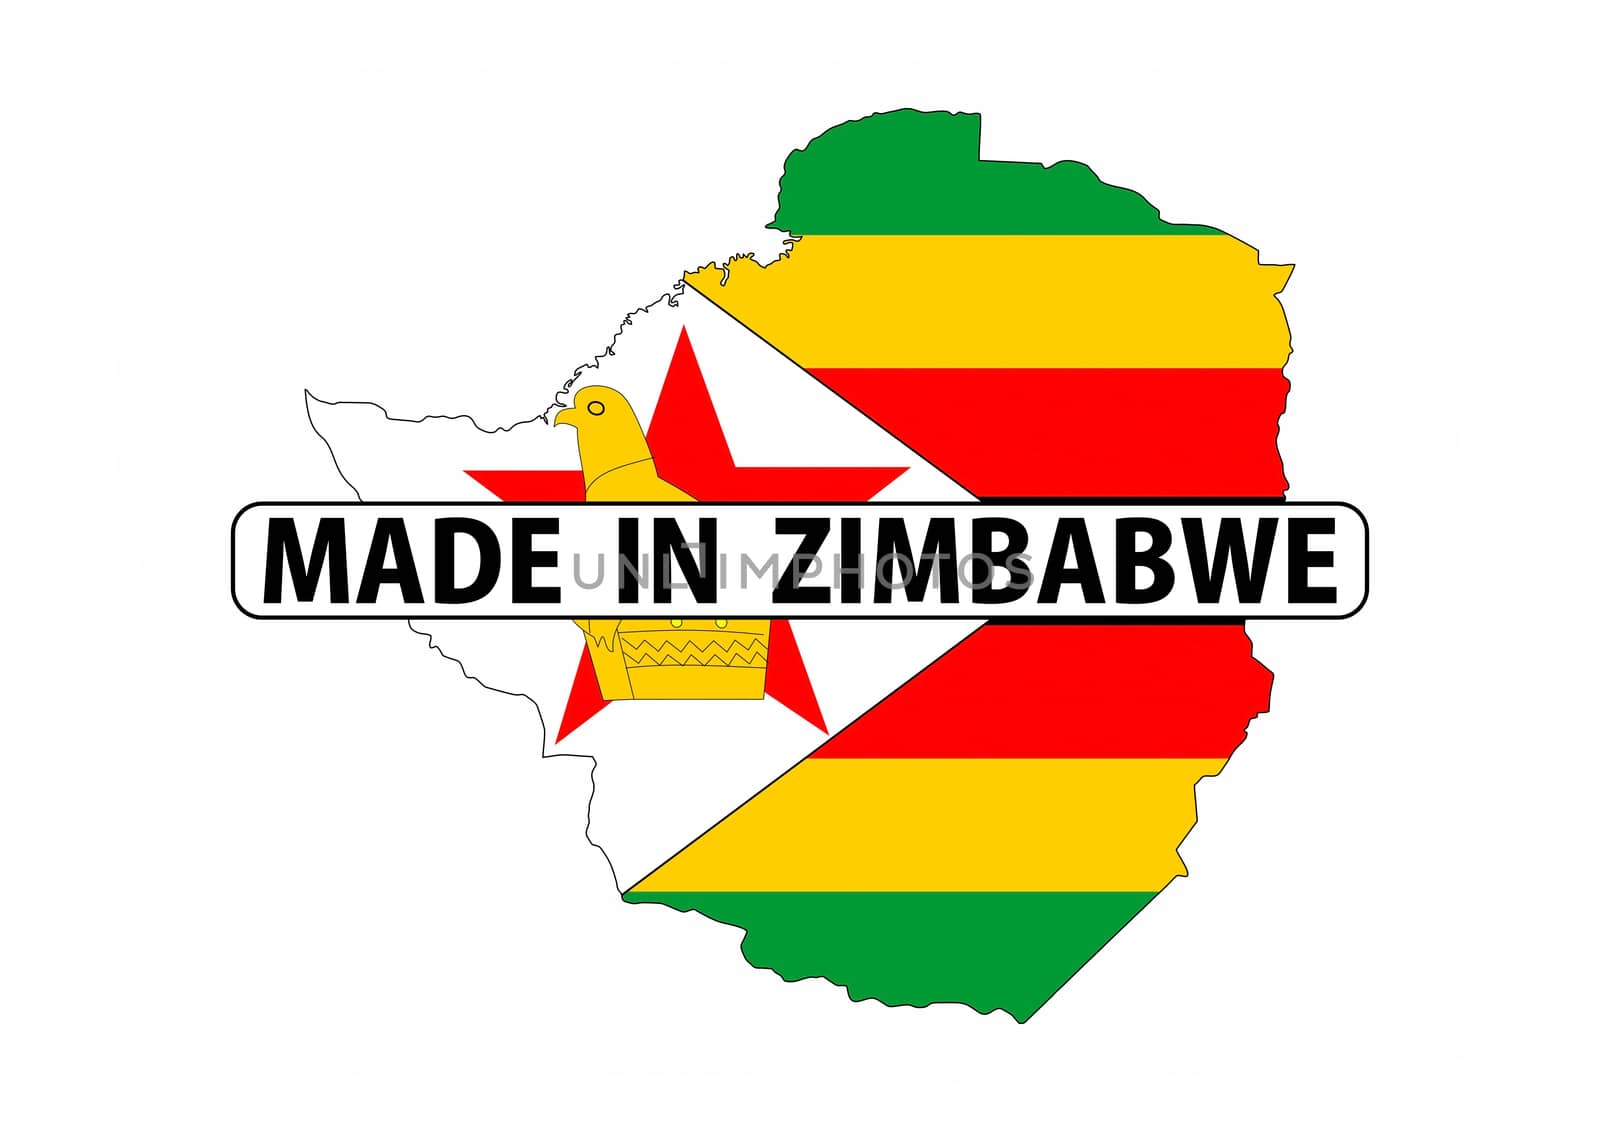 made in zimbabwe country national flag map shape with text